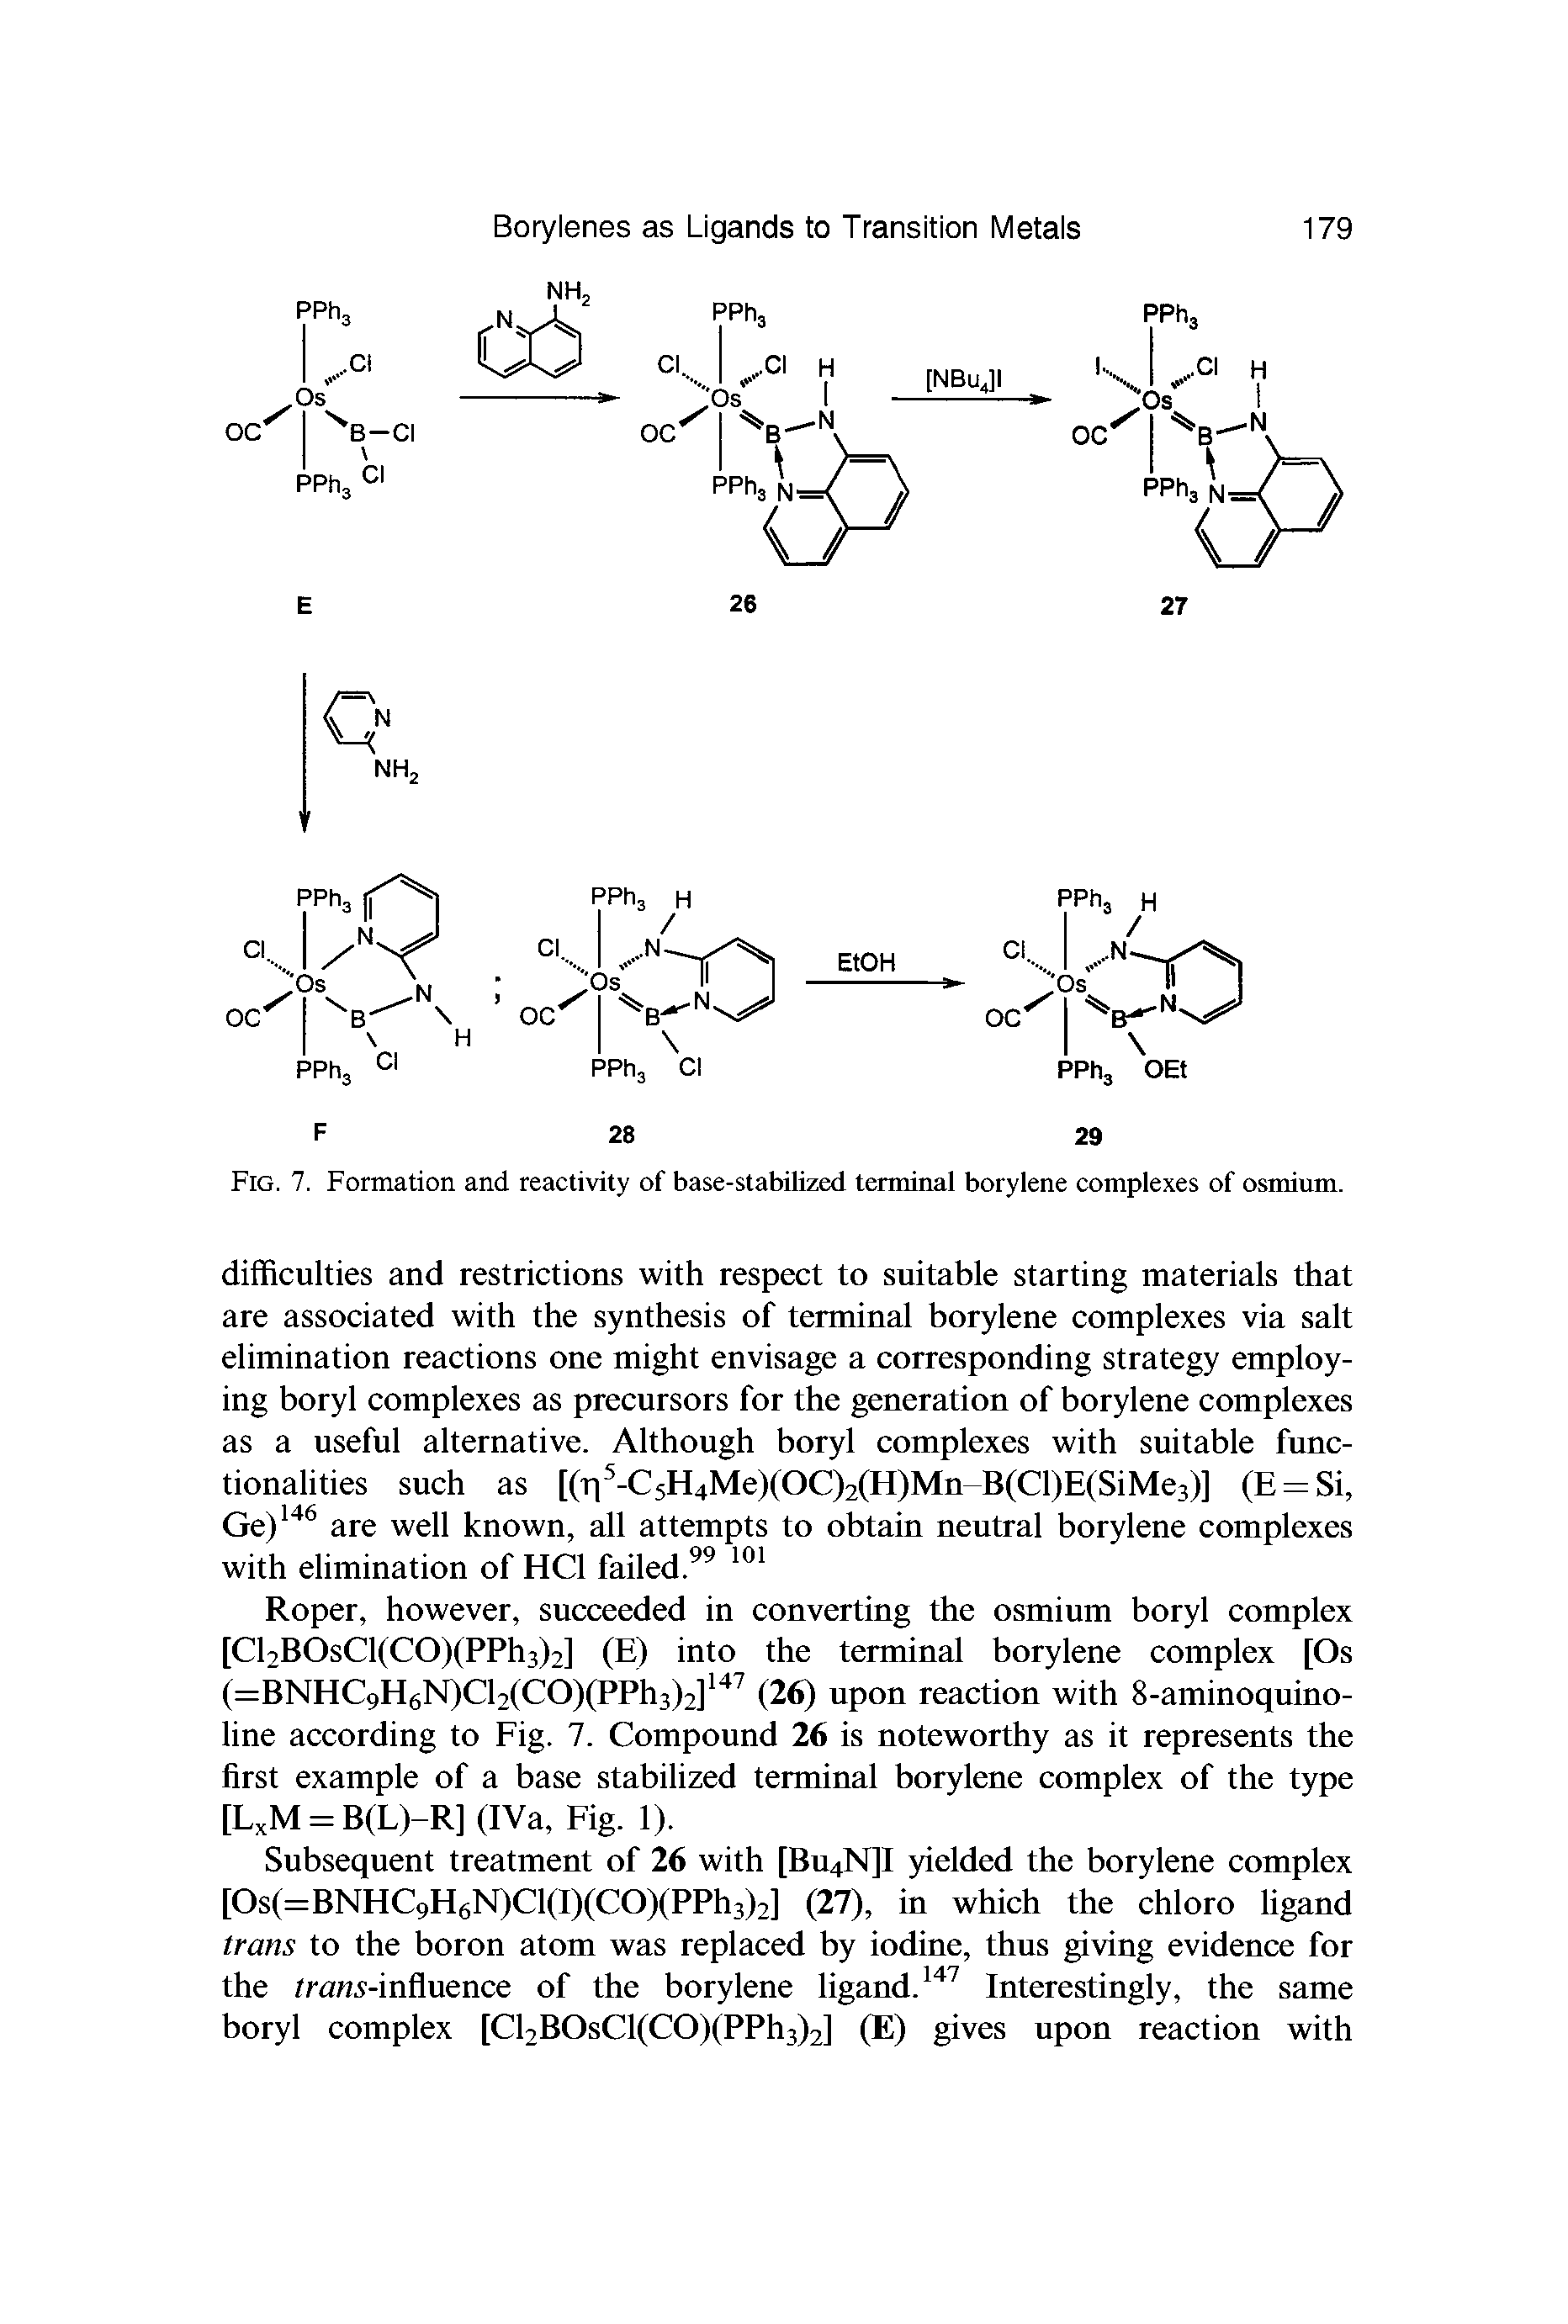 Fig. 7. Formation and reactivity of base-stabilized terminal borylene complexes of osmium.